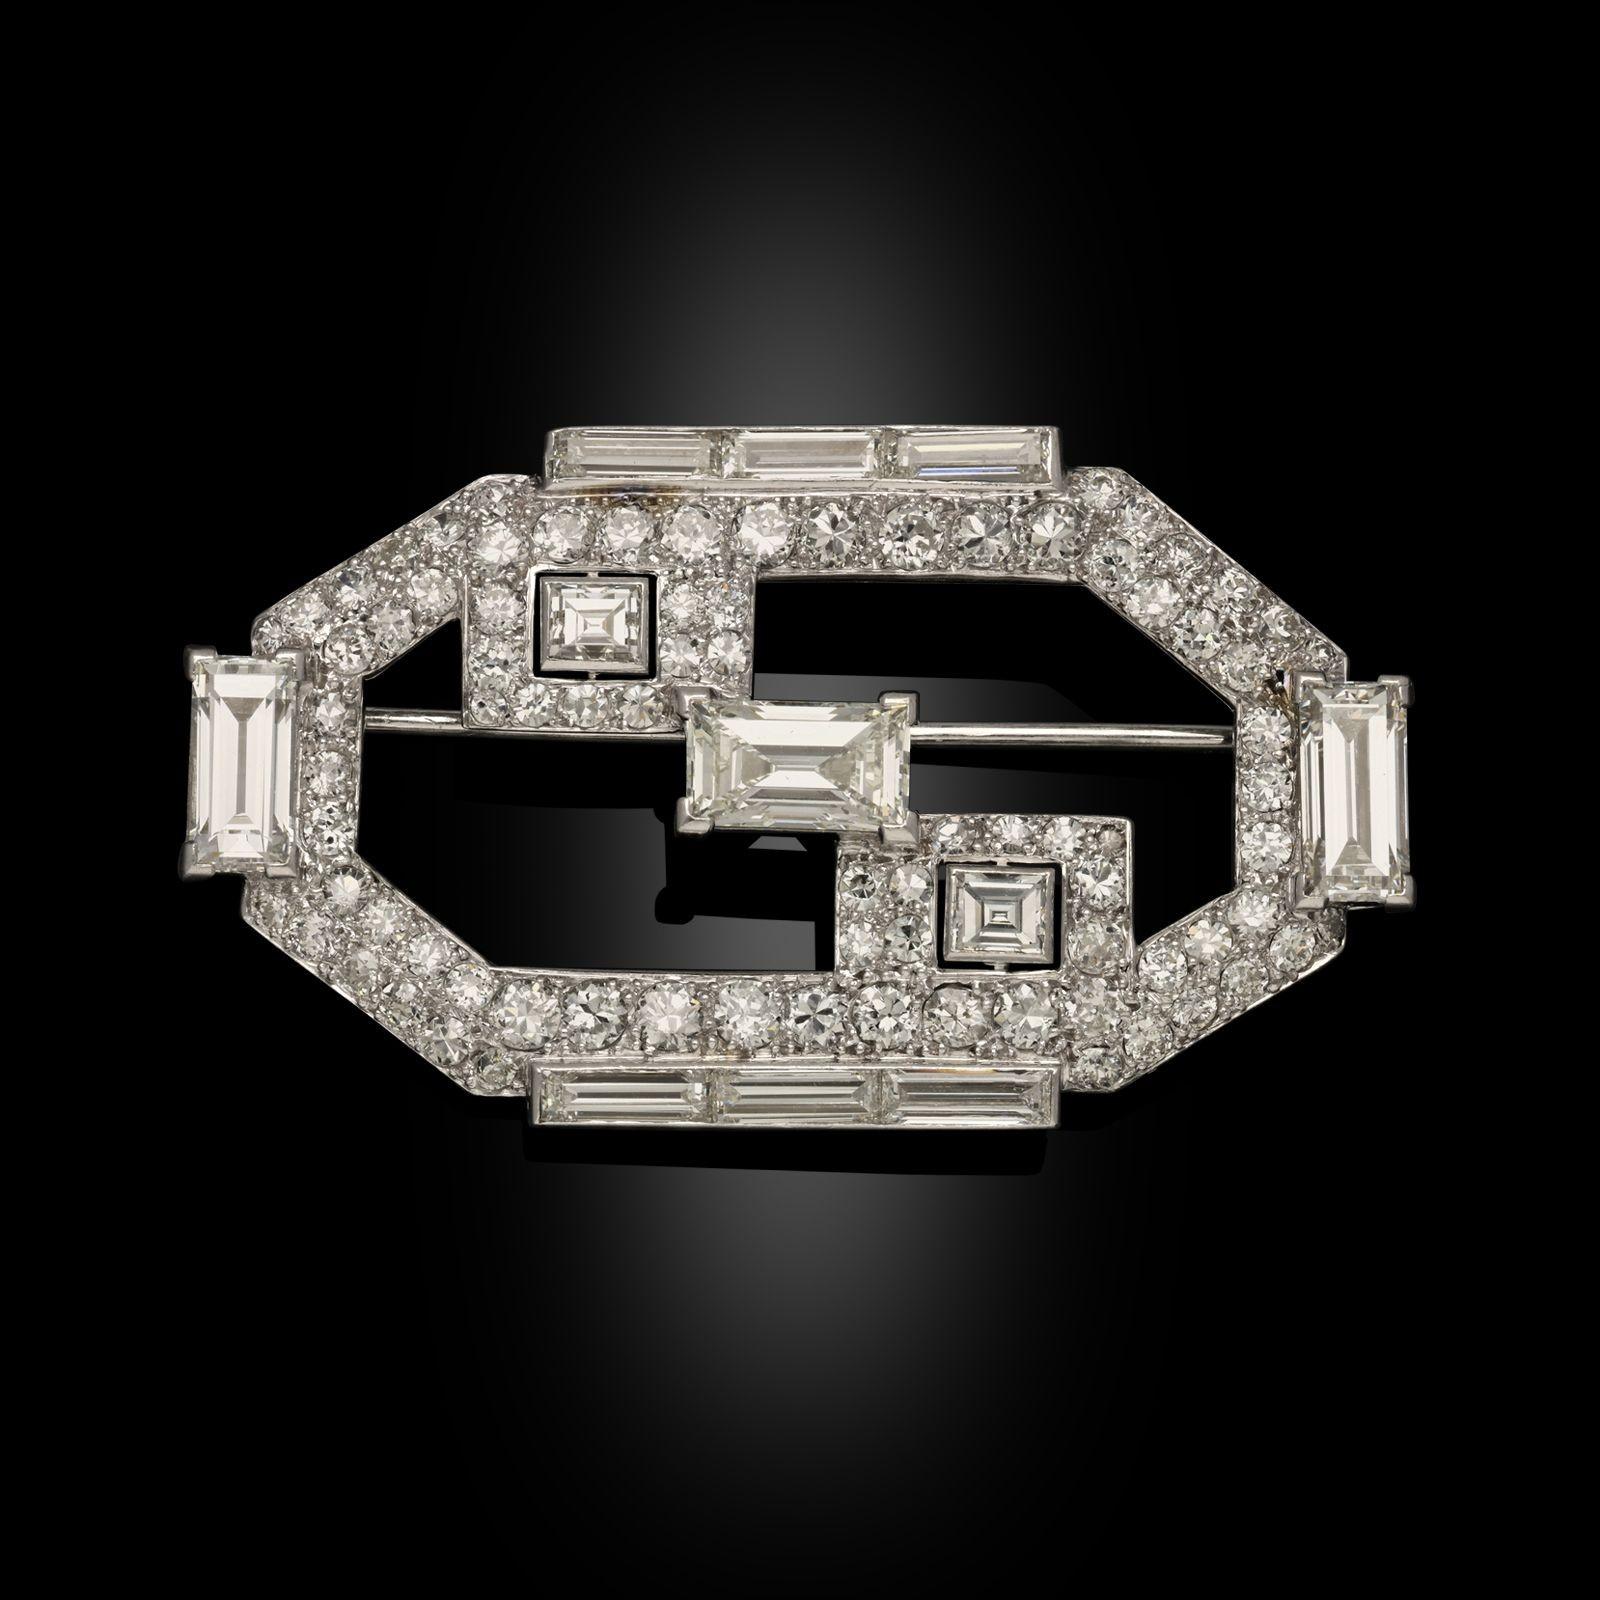 An Art Deco old cut diamond and platinum brooch by Cartier, circa 1930. This brooch is of a geometric design, set with a mixture of baguette cut and old European cut diamonds. The brooch is all set in platinum with a single pin fitting on the